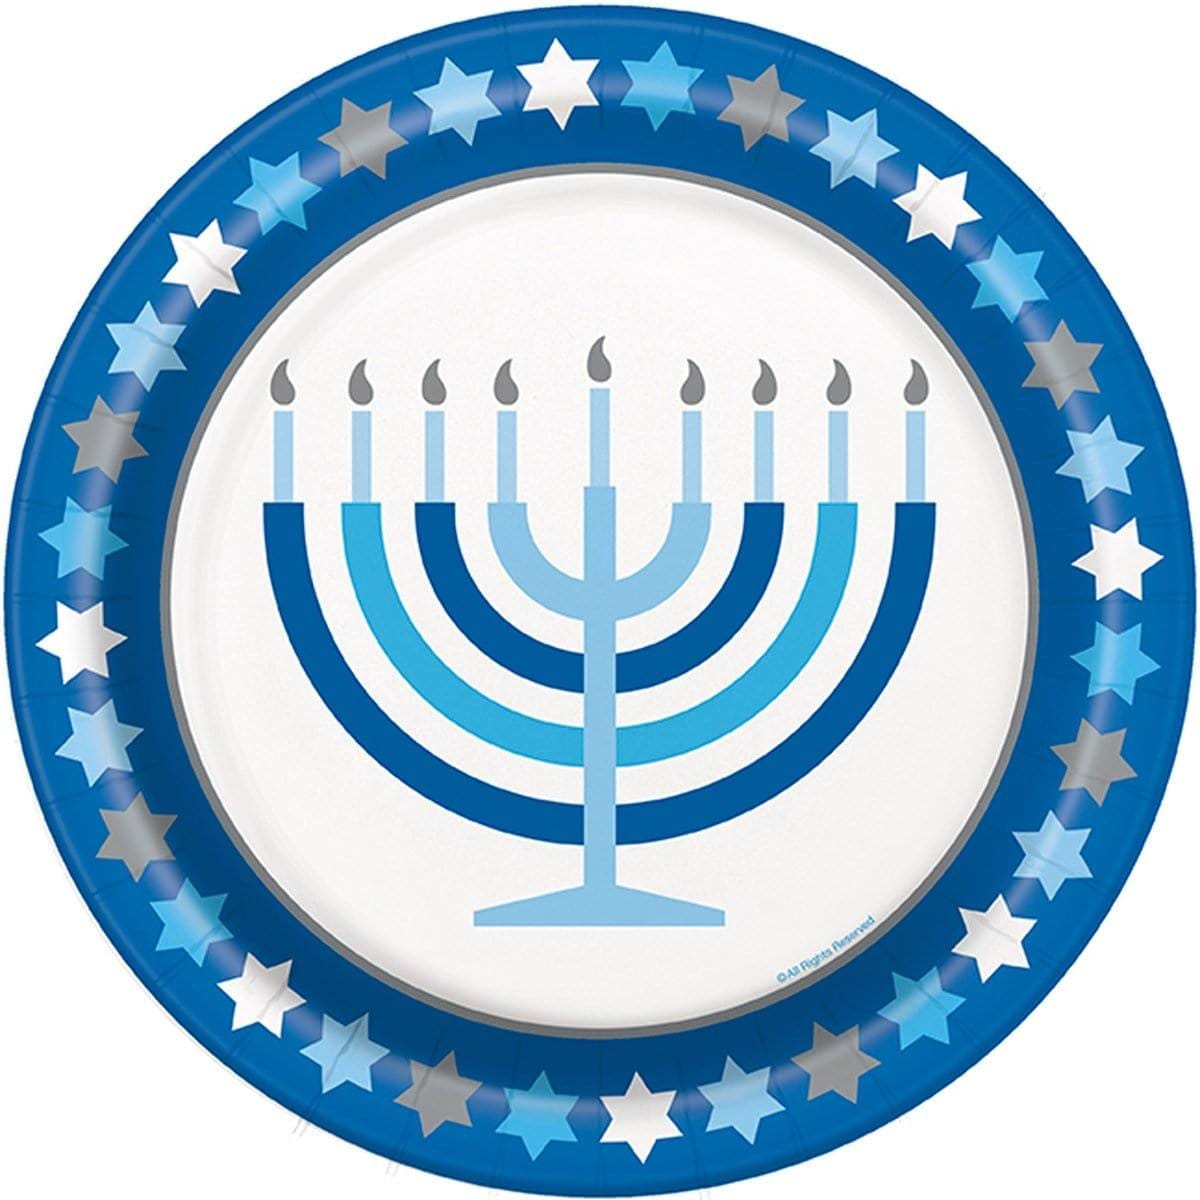 Buy Hanukkah Starry Hanukkah paper plates 9 inches, 8 per package sold at Party Expert